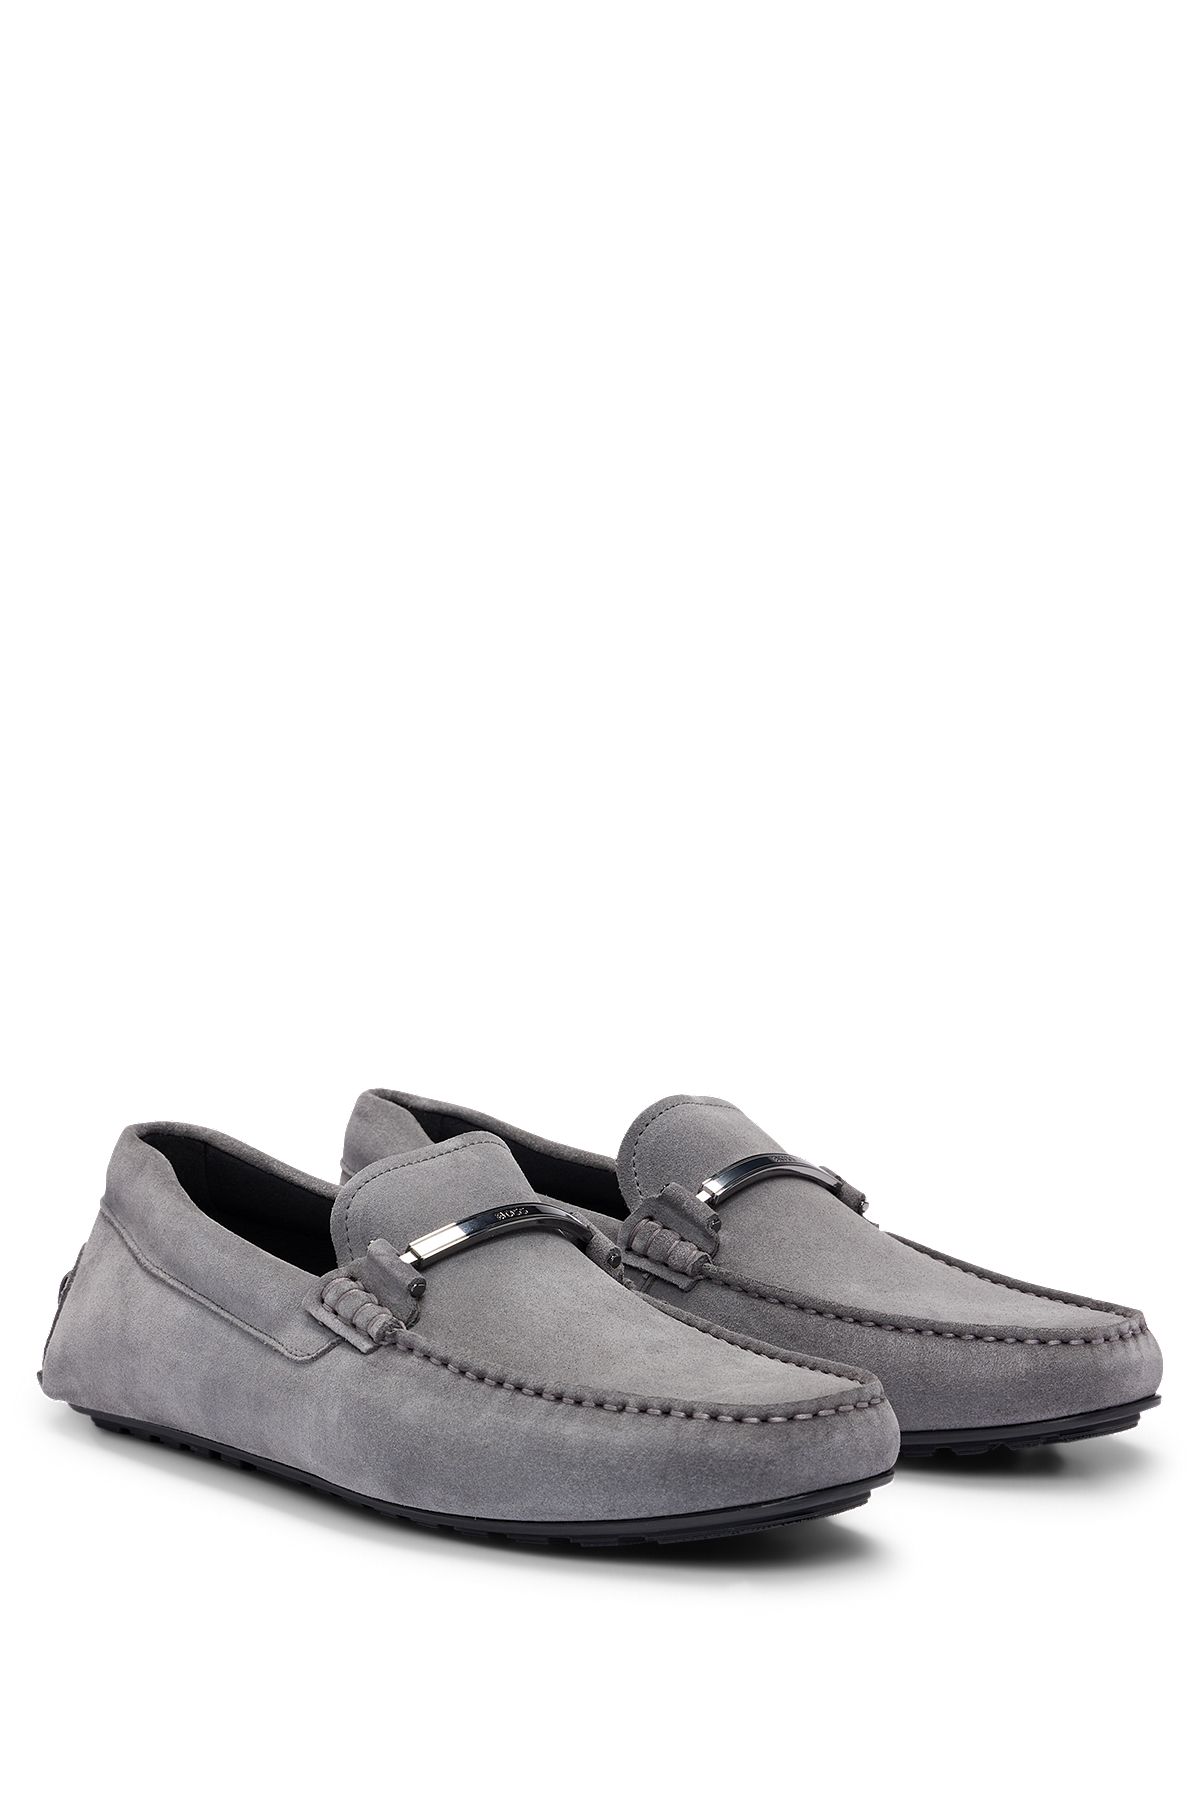 Suede moccasins with branded hardware and full lining, Grey